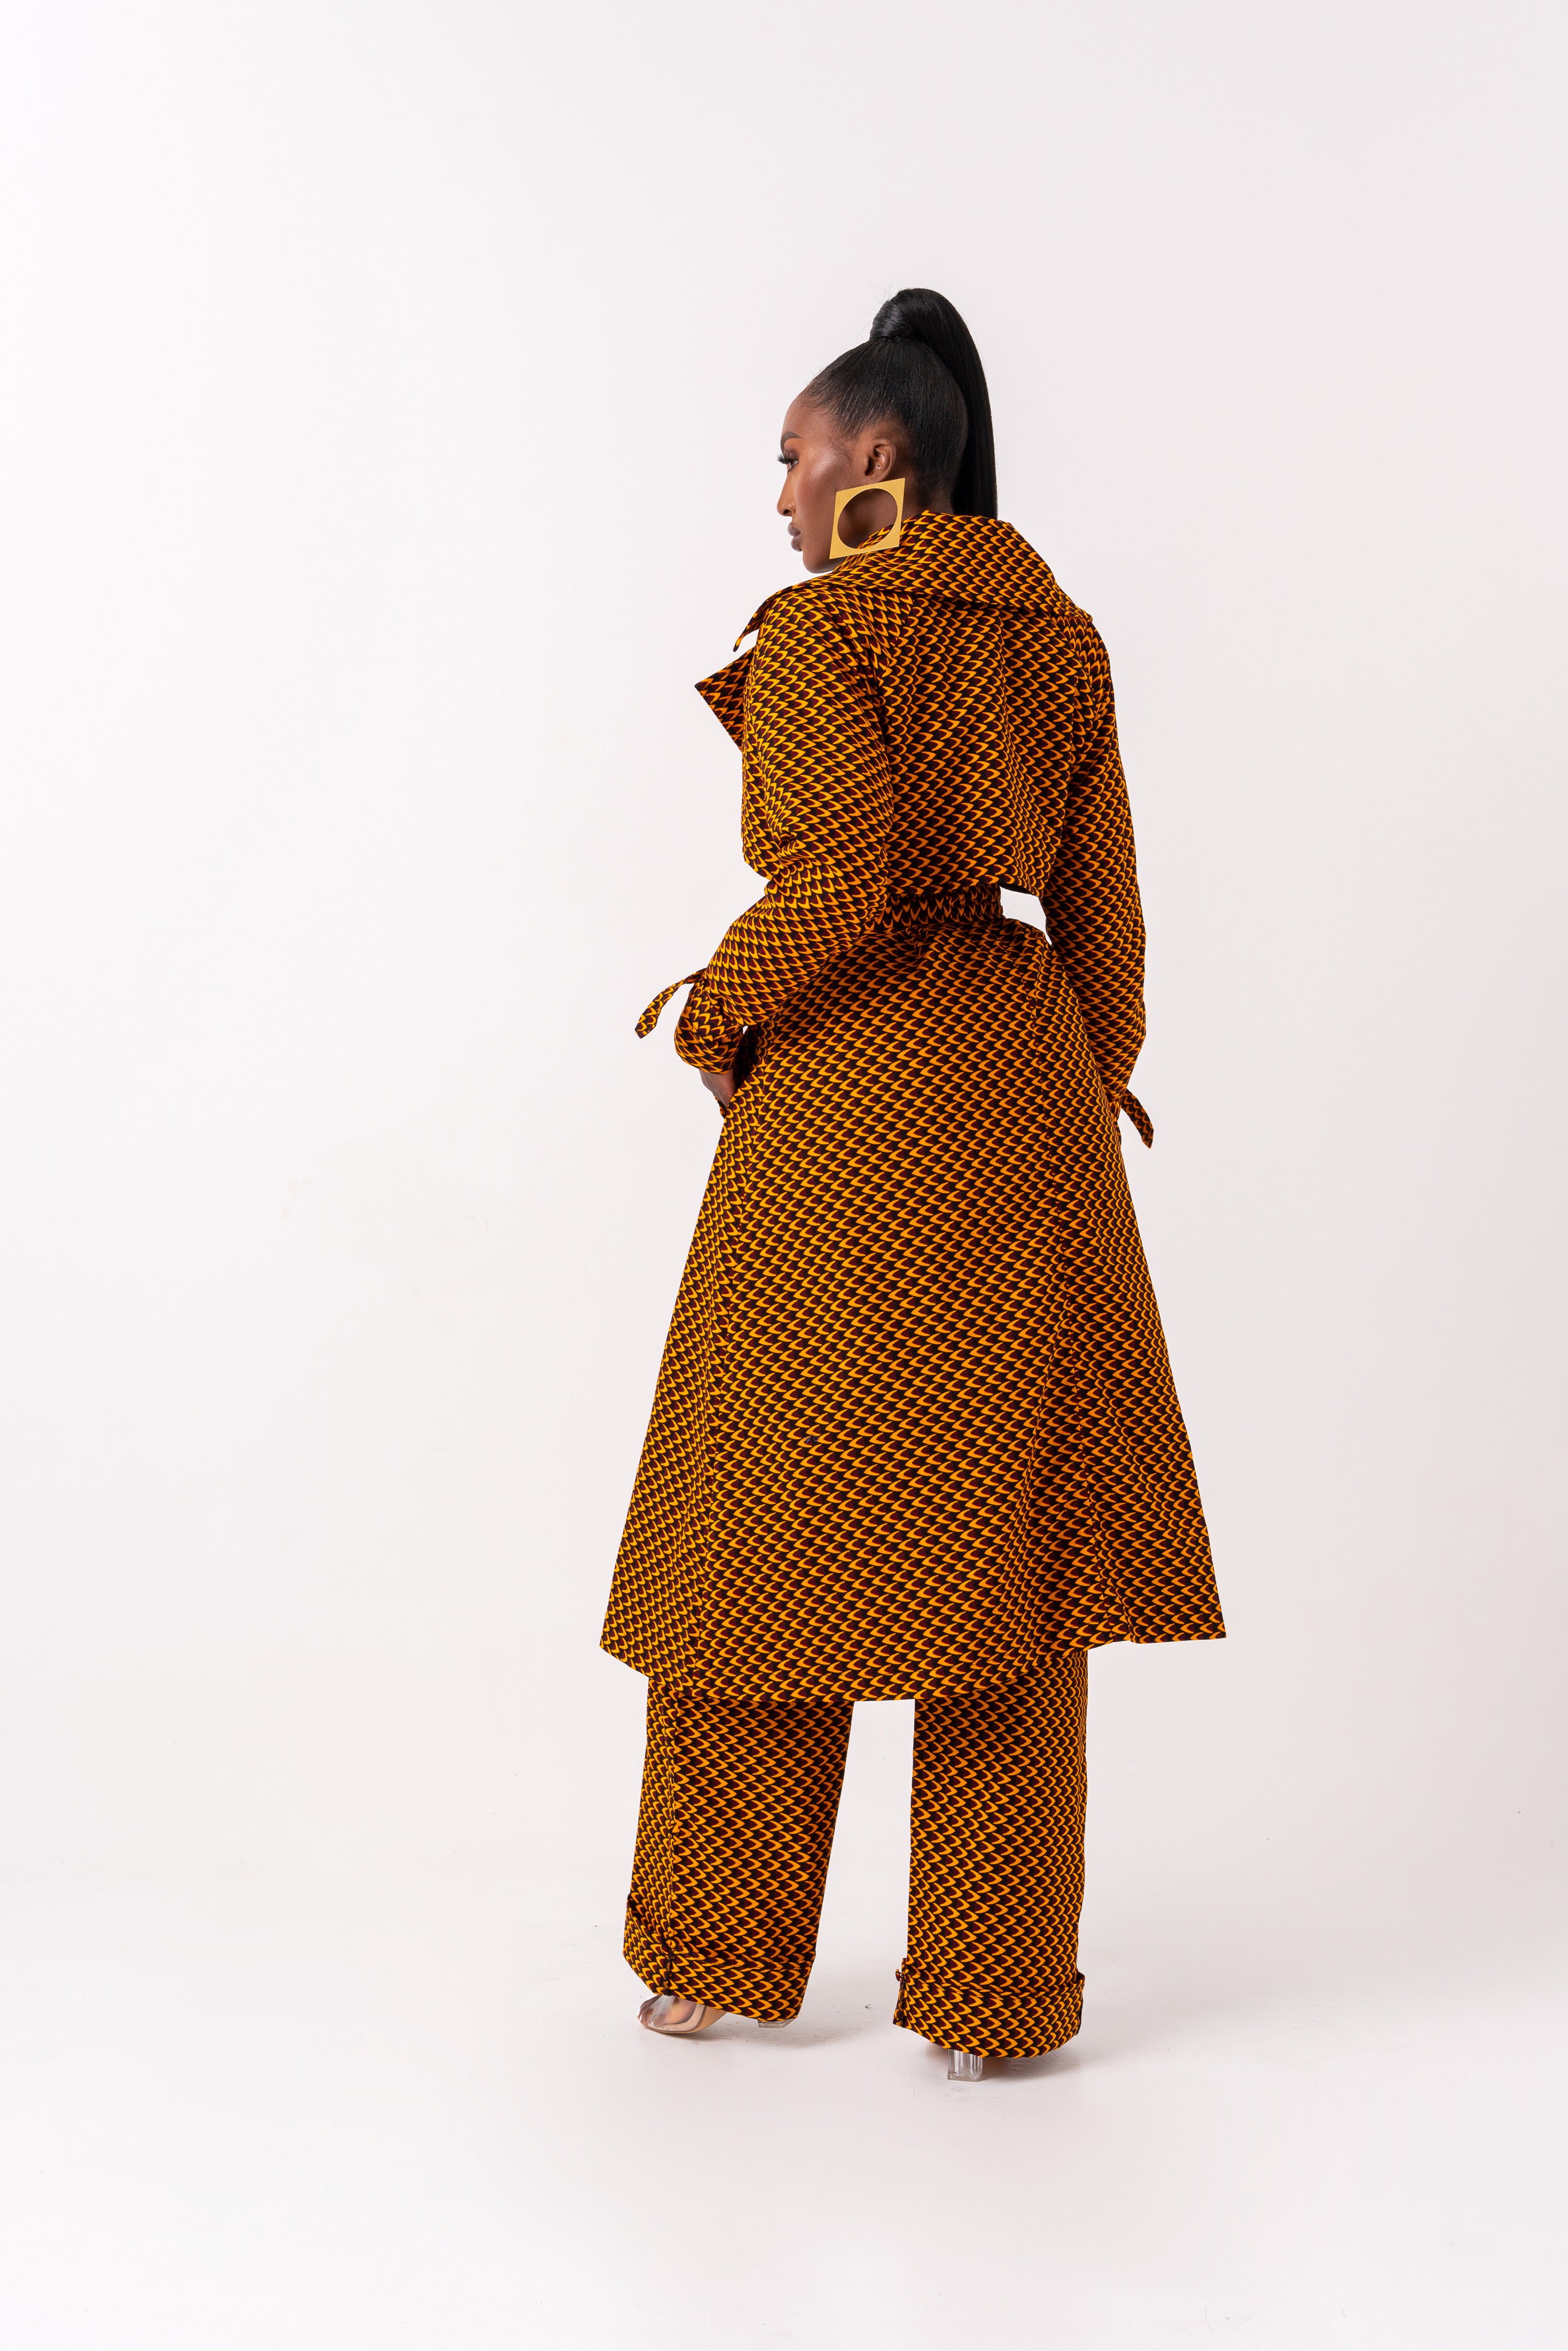 AGBANI African Print Trench Jacket